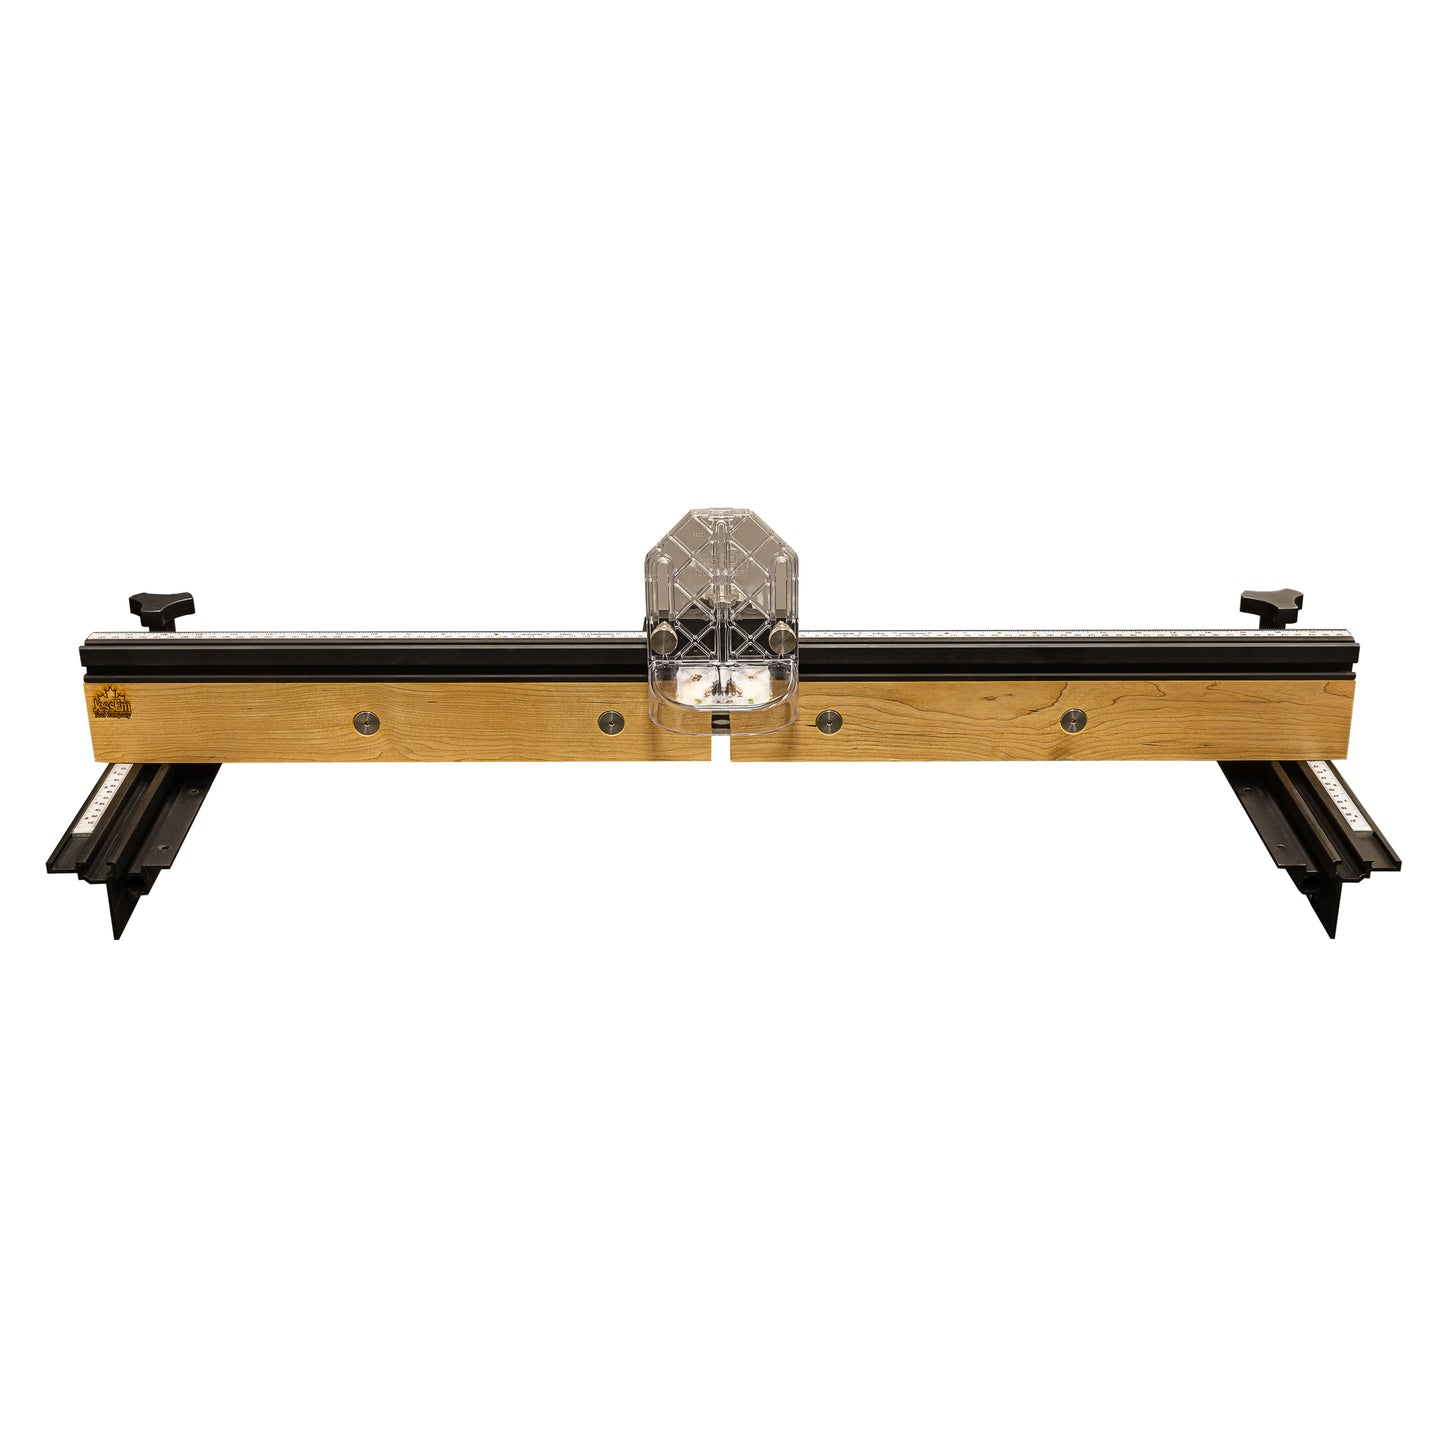 Mast-R-Lift II Complete Table Package - THIS ITEM IS ESTIMATED TO SHIP WITHIN 4 - 6 WEEKS